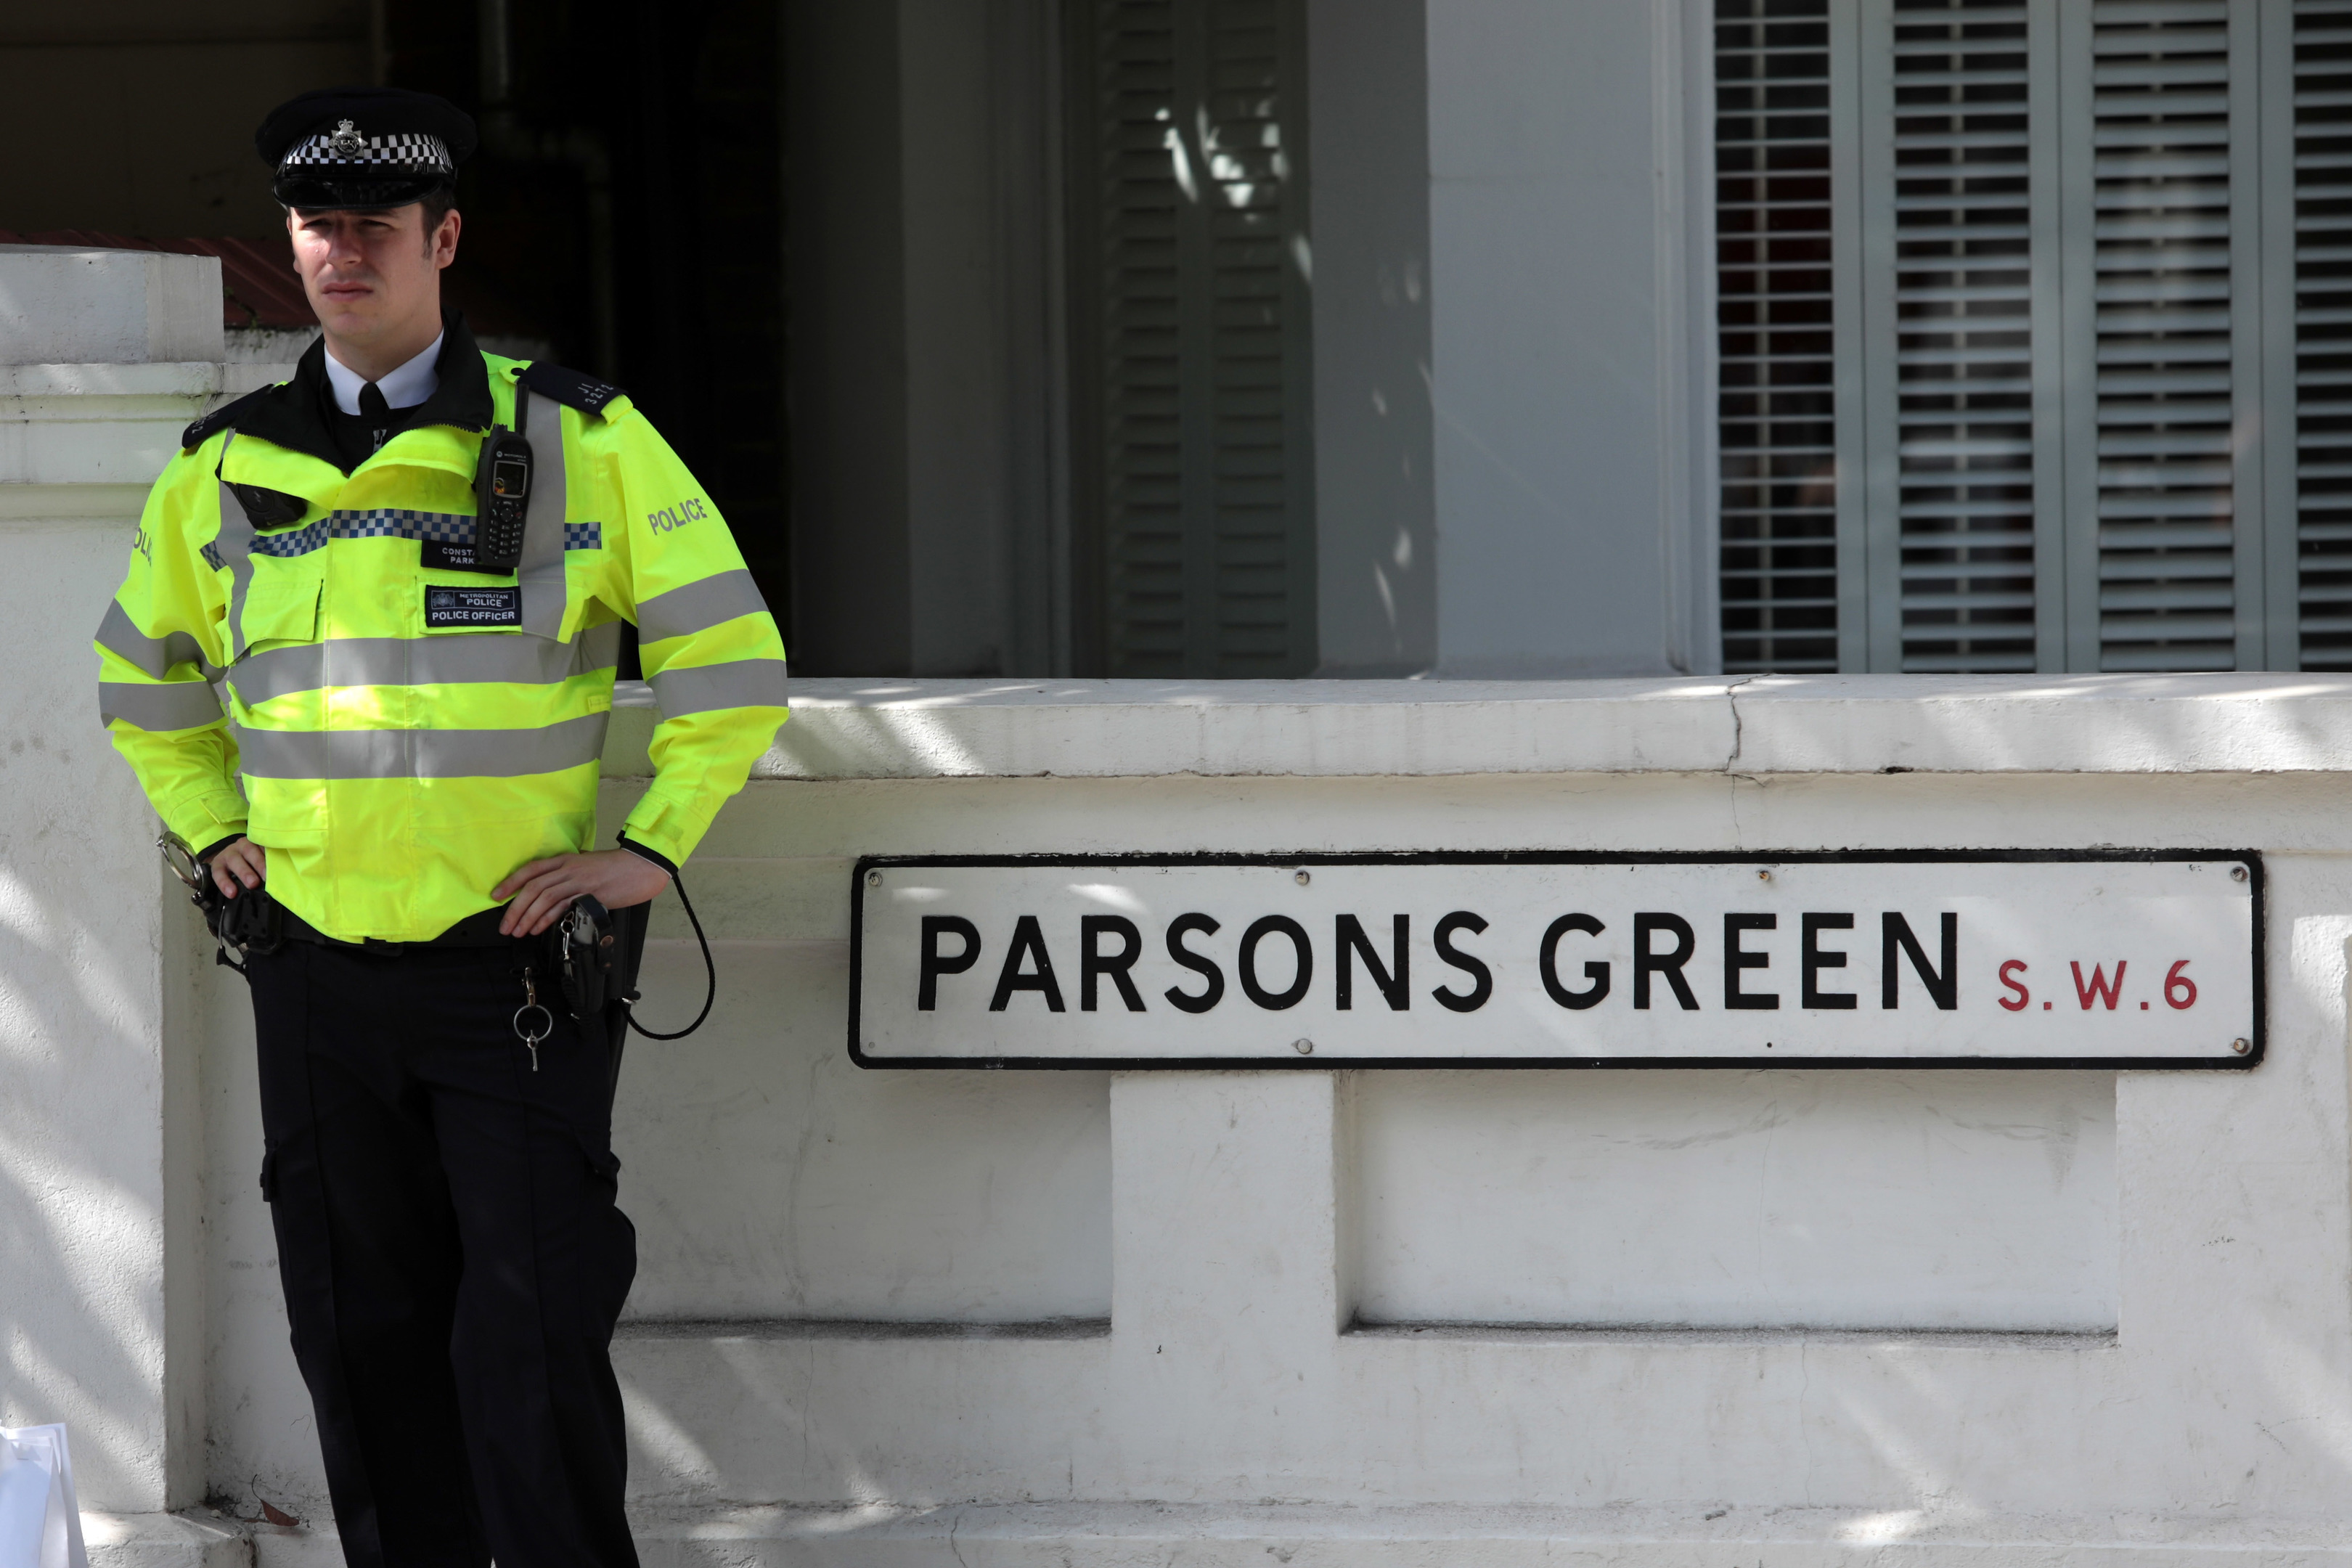 A police officer stands next to a street sign near Parsons Green Underground Station on September 15, 2017 in London, England. (Jack Taylor/Getty Images)